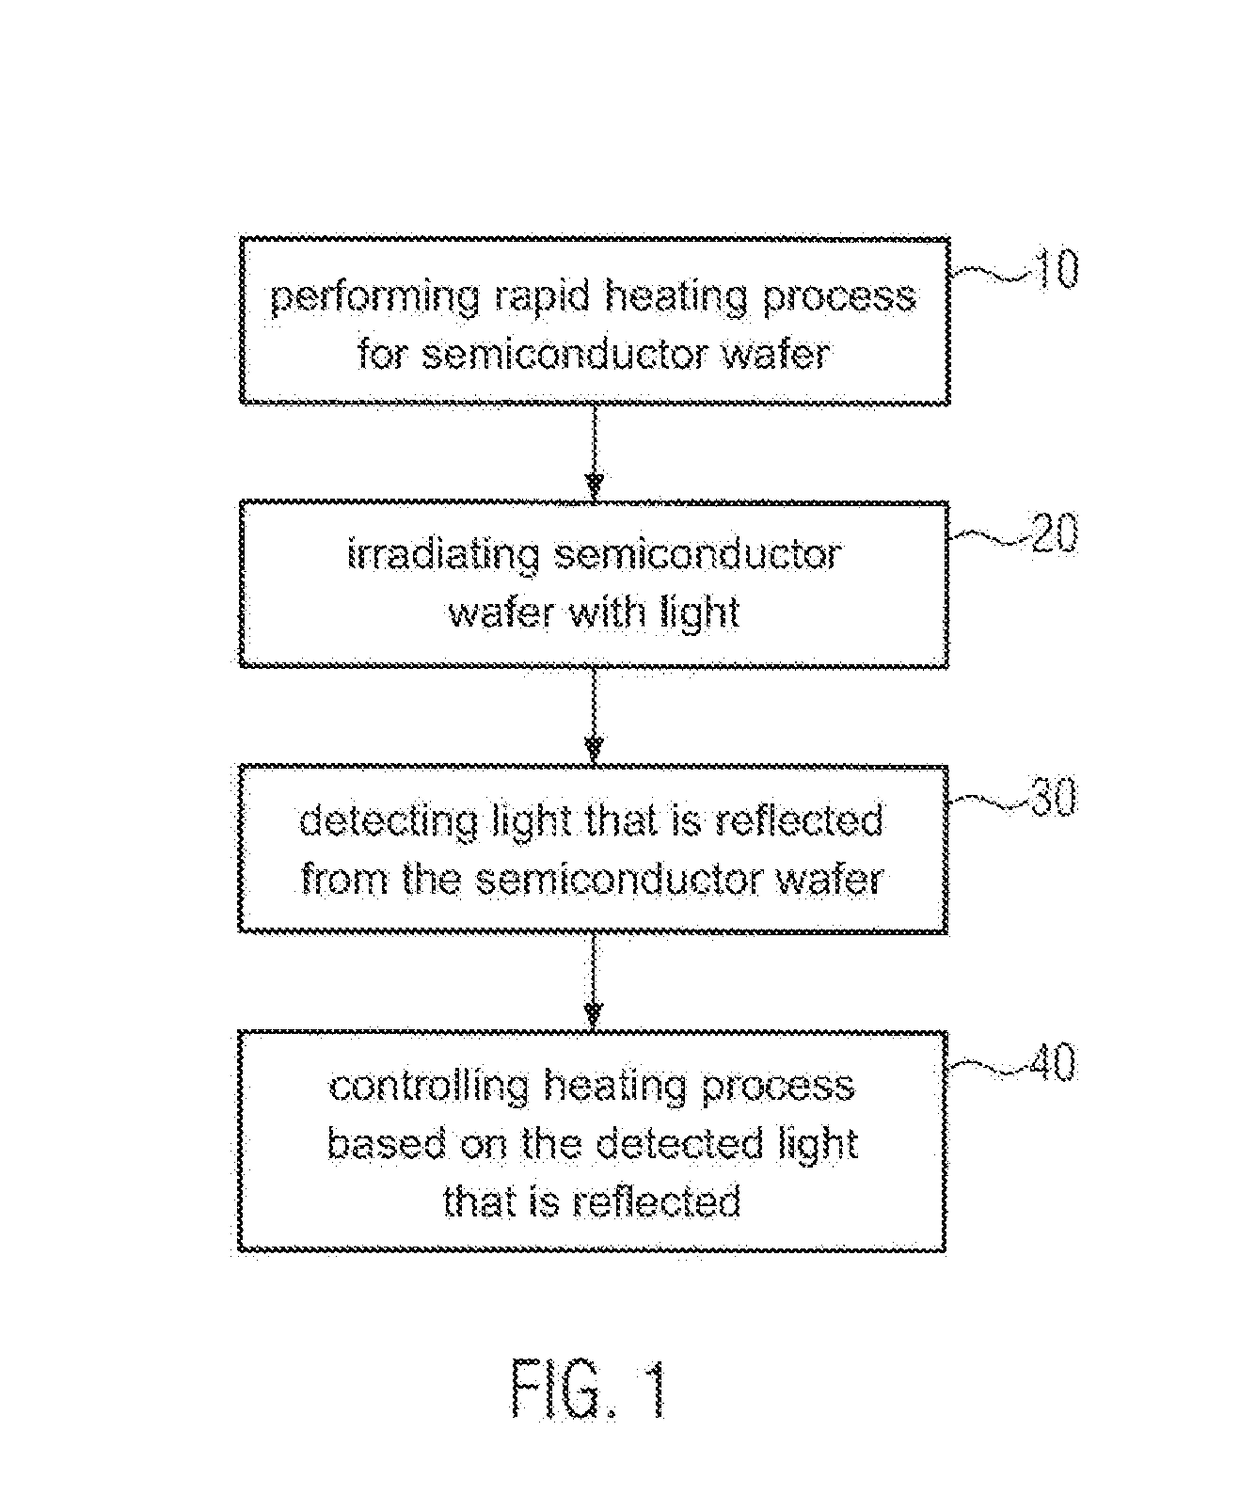 Rapid heating process in the production of semiconductor components